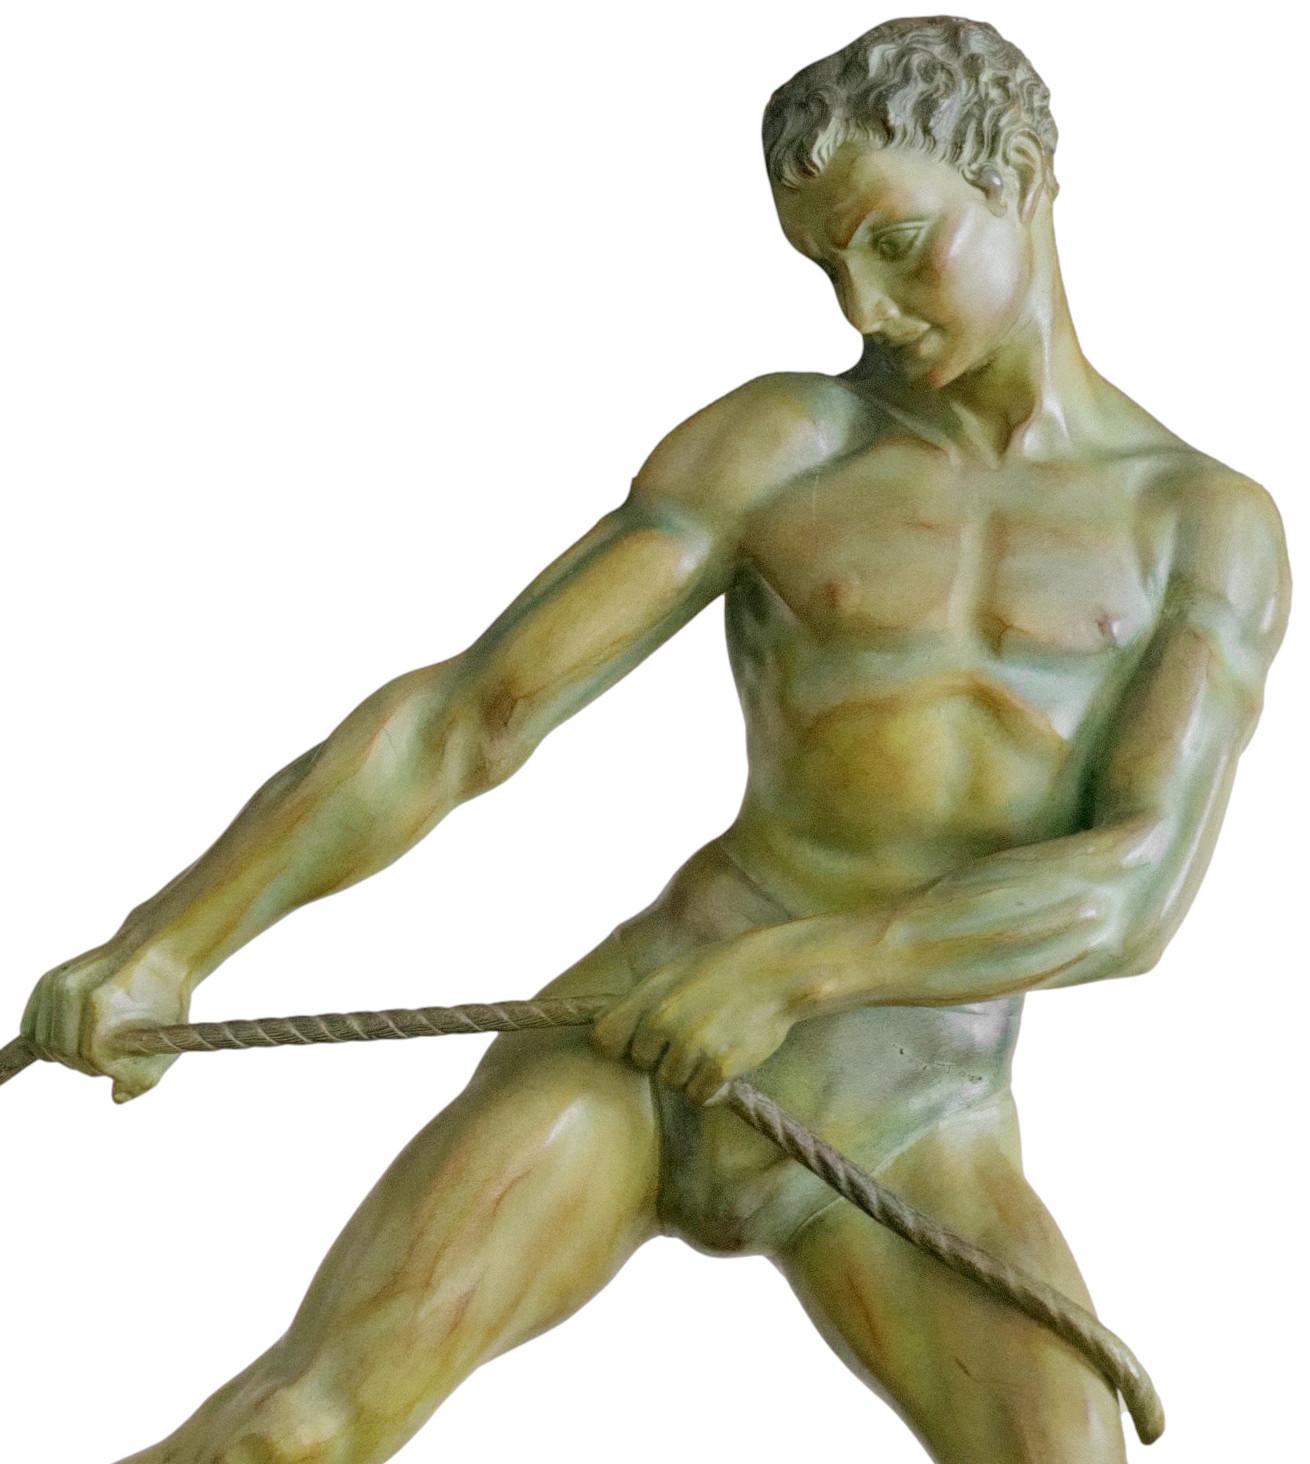 French Art Deco Lumberjack Sculpture, Ca.1925 For Sale 4